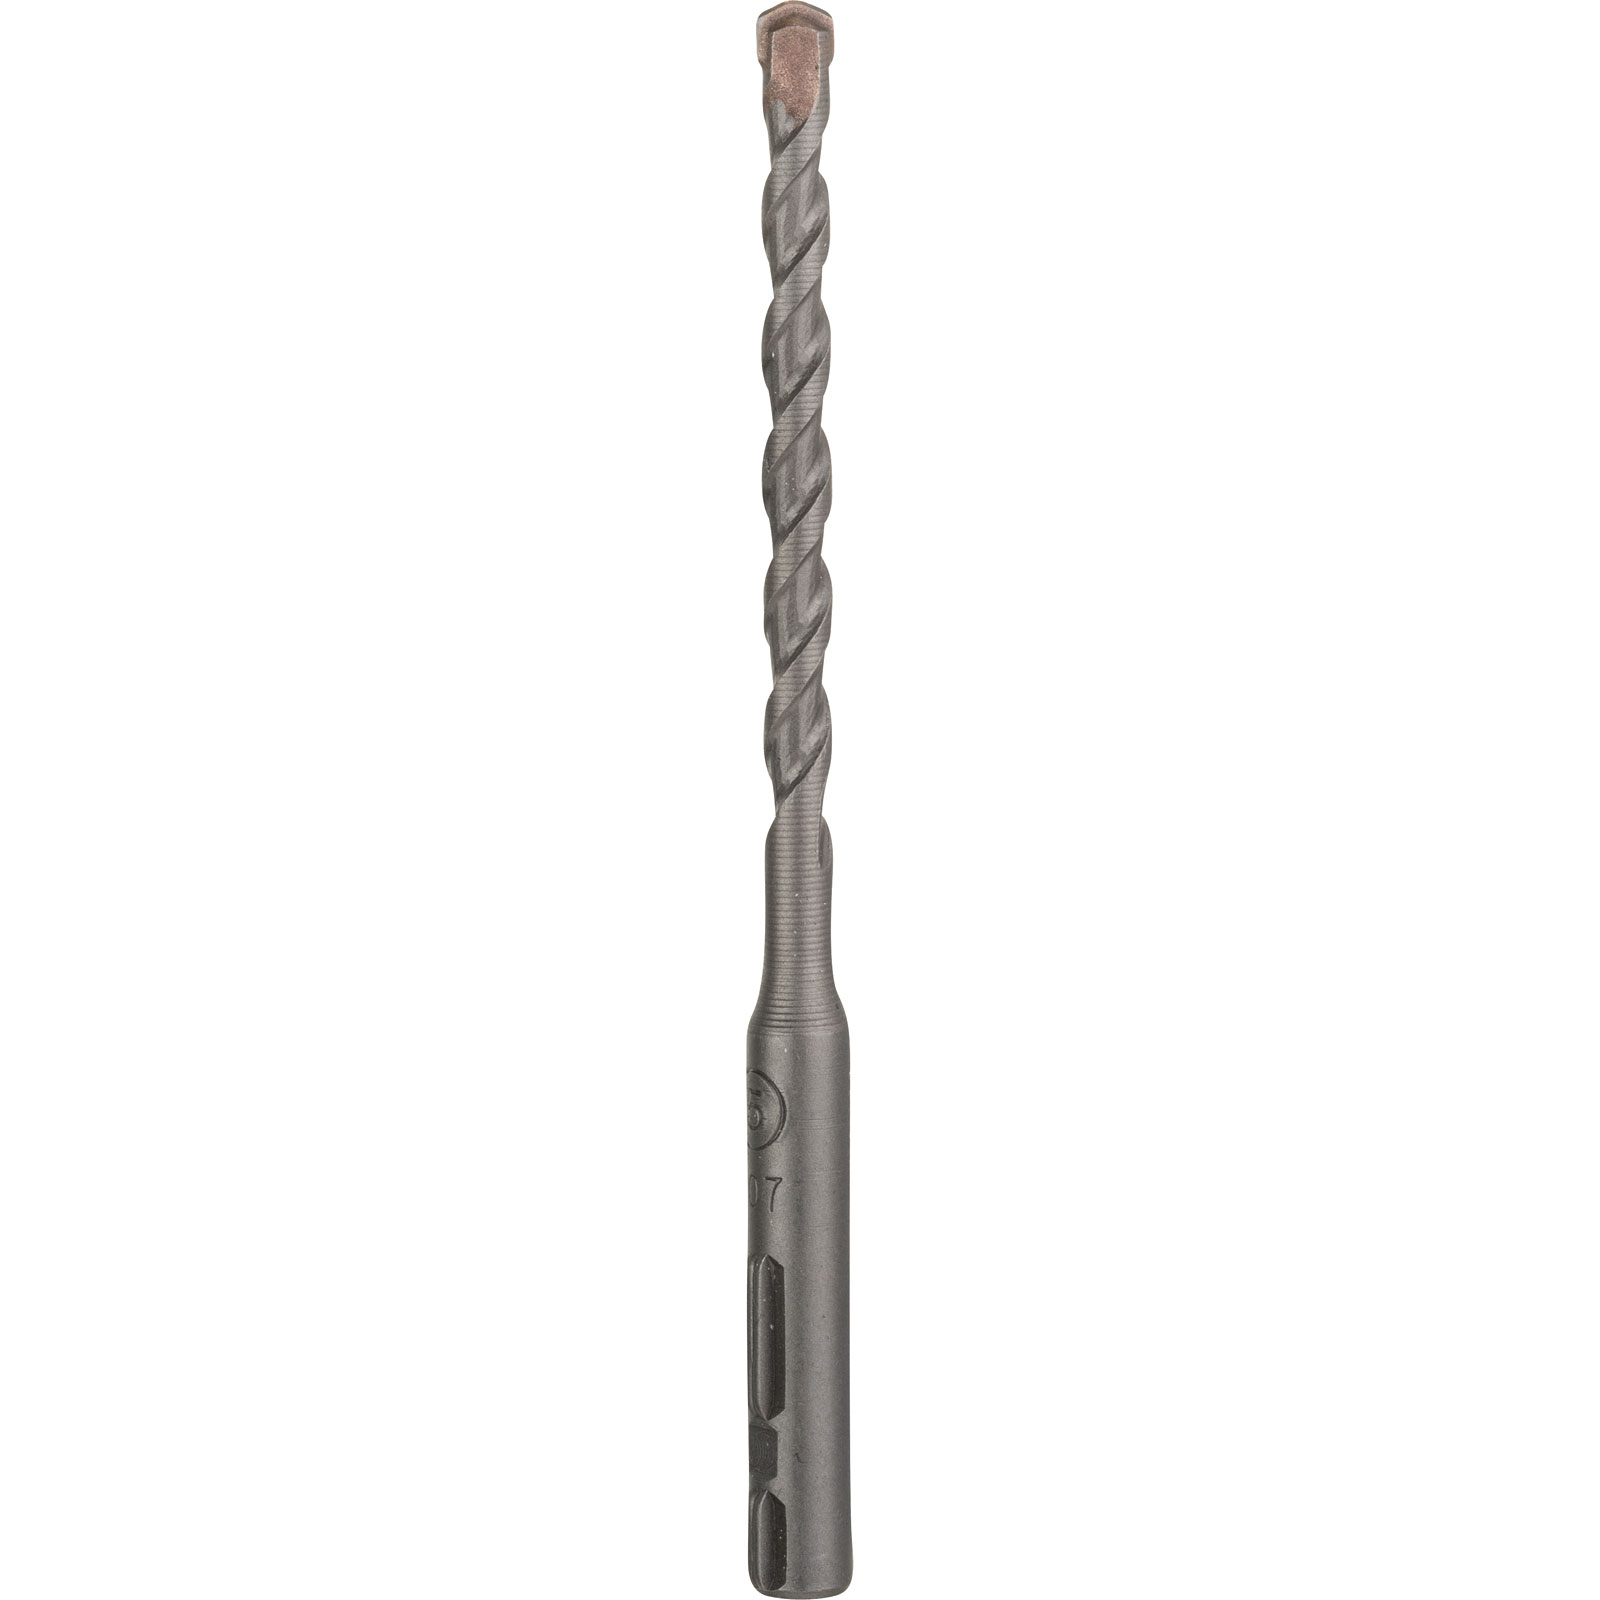 Photo of Bosch Uneo Sds Quick Masonary Drill Bit 5mm 100mm Pack Of 1